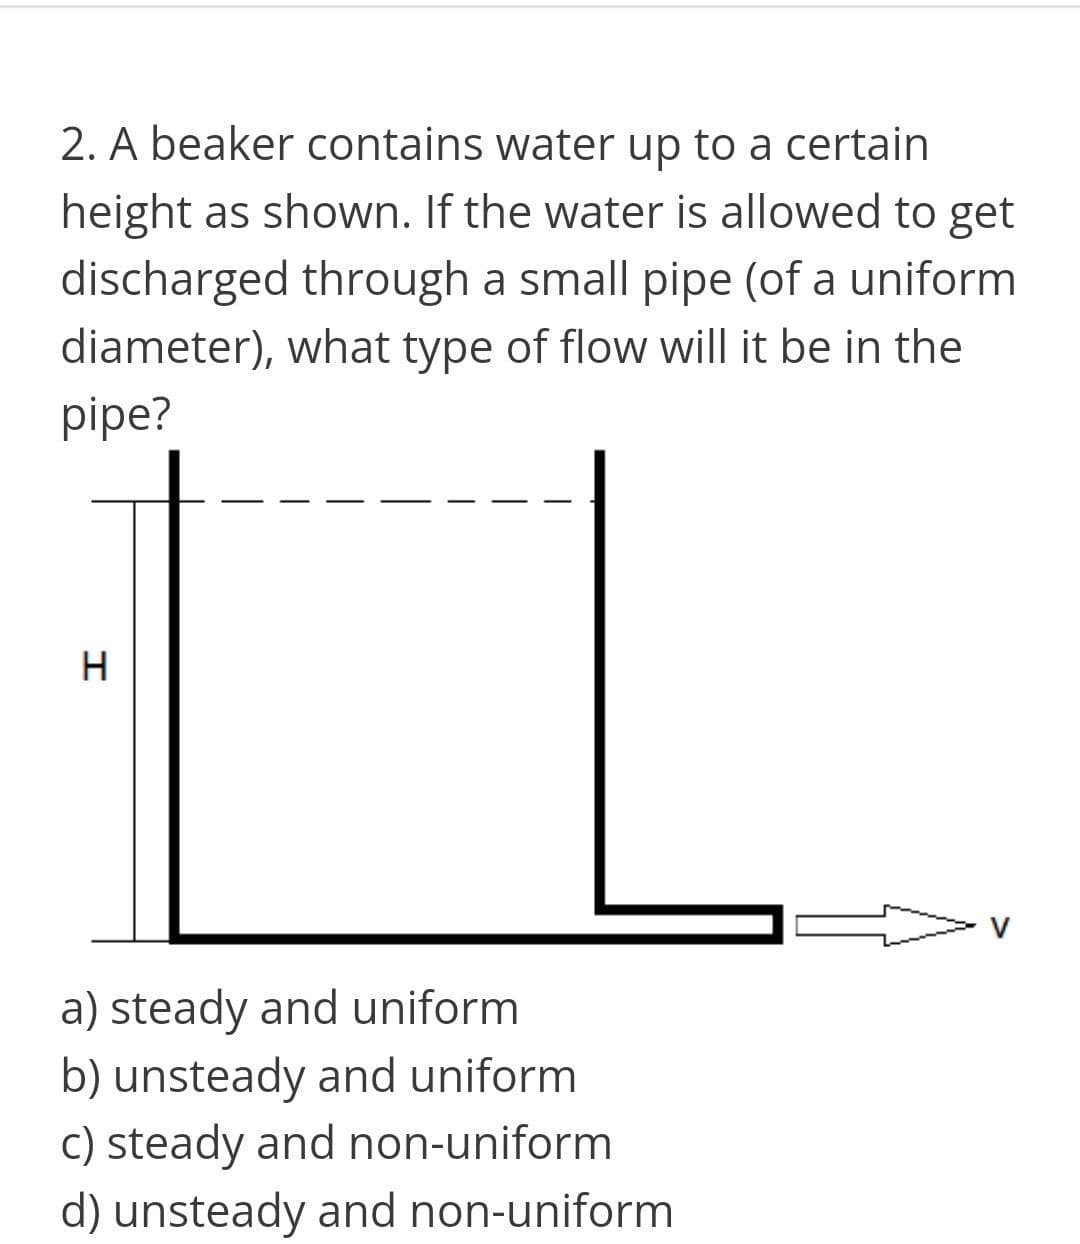 2. A beaker contains water up to a certain
height as shown. If the water is allowed to get
discharged through a small pipe (of a uniform
diameter), what type of flow will it be in the
pipe?
a) steady and uniform
b) unsteady and uniform
c) steady and non-uniform
d) unsteady and non-uniform
